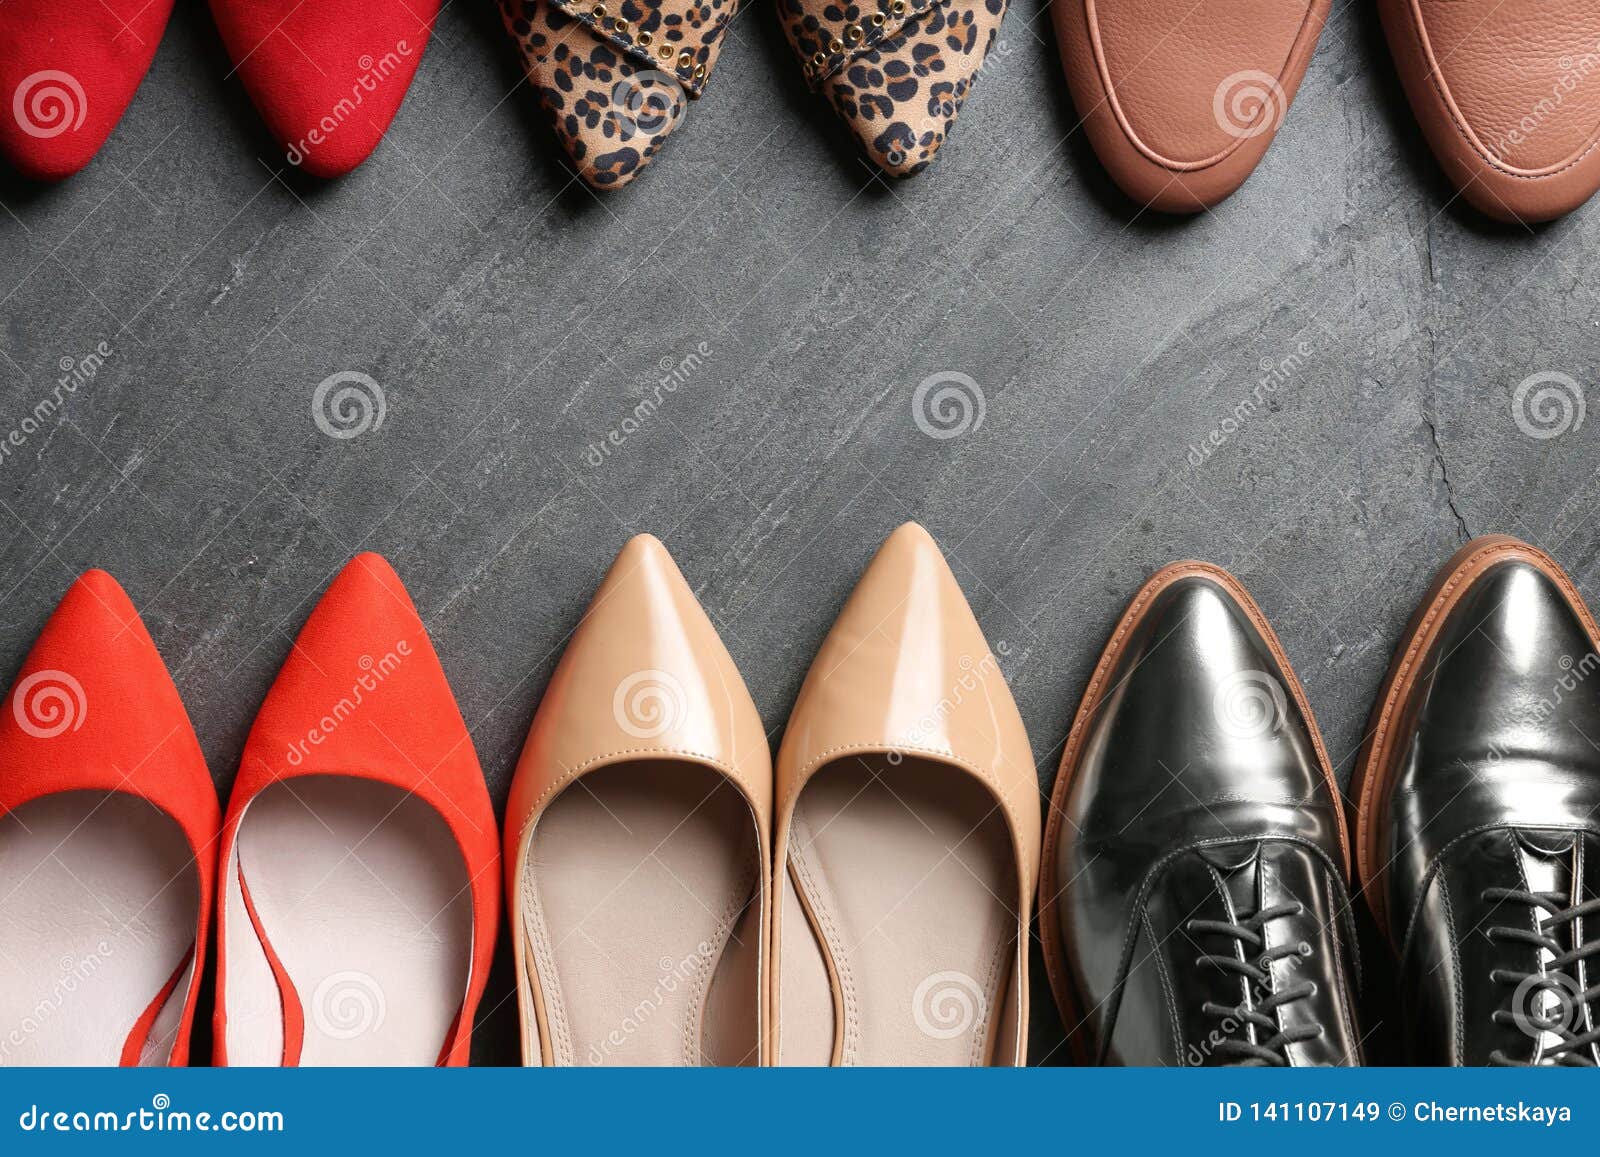 Flat Lay Composition with Stylish Shoes Stock Image - Image of ...